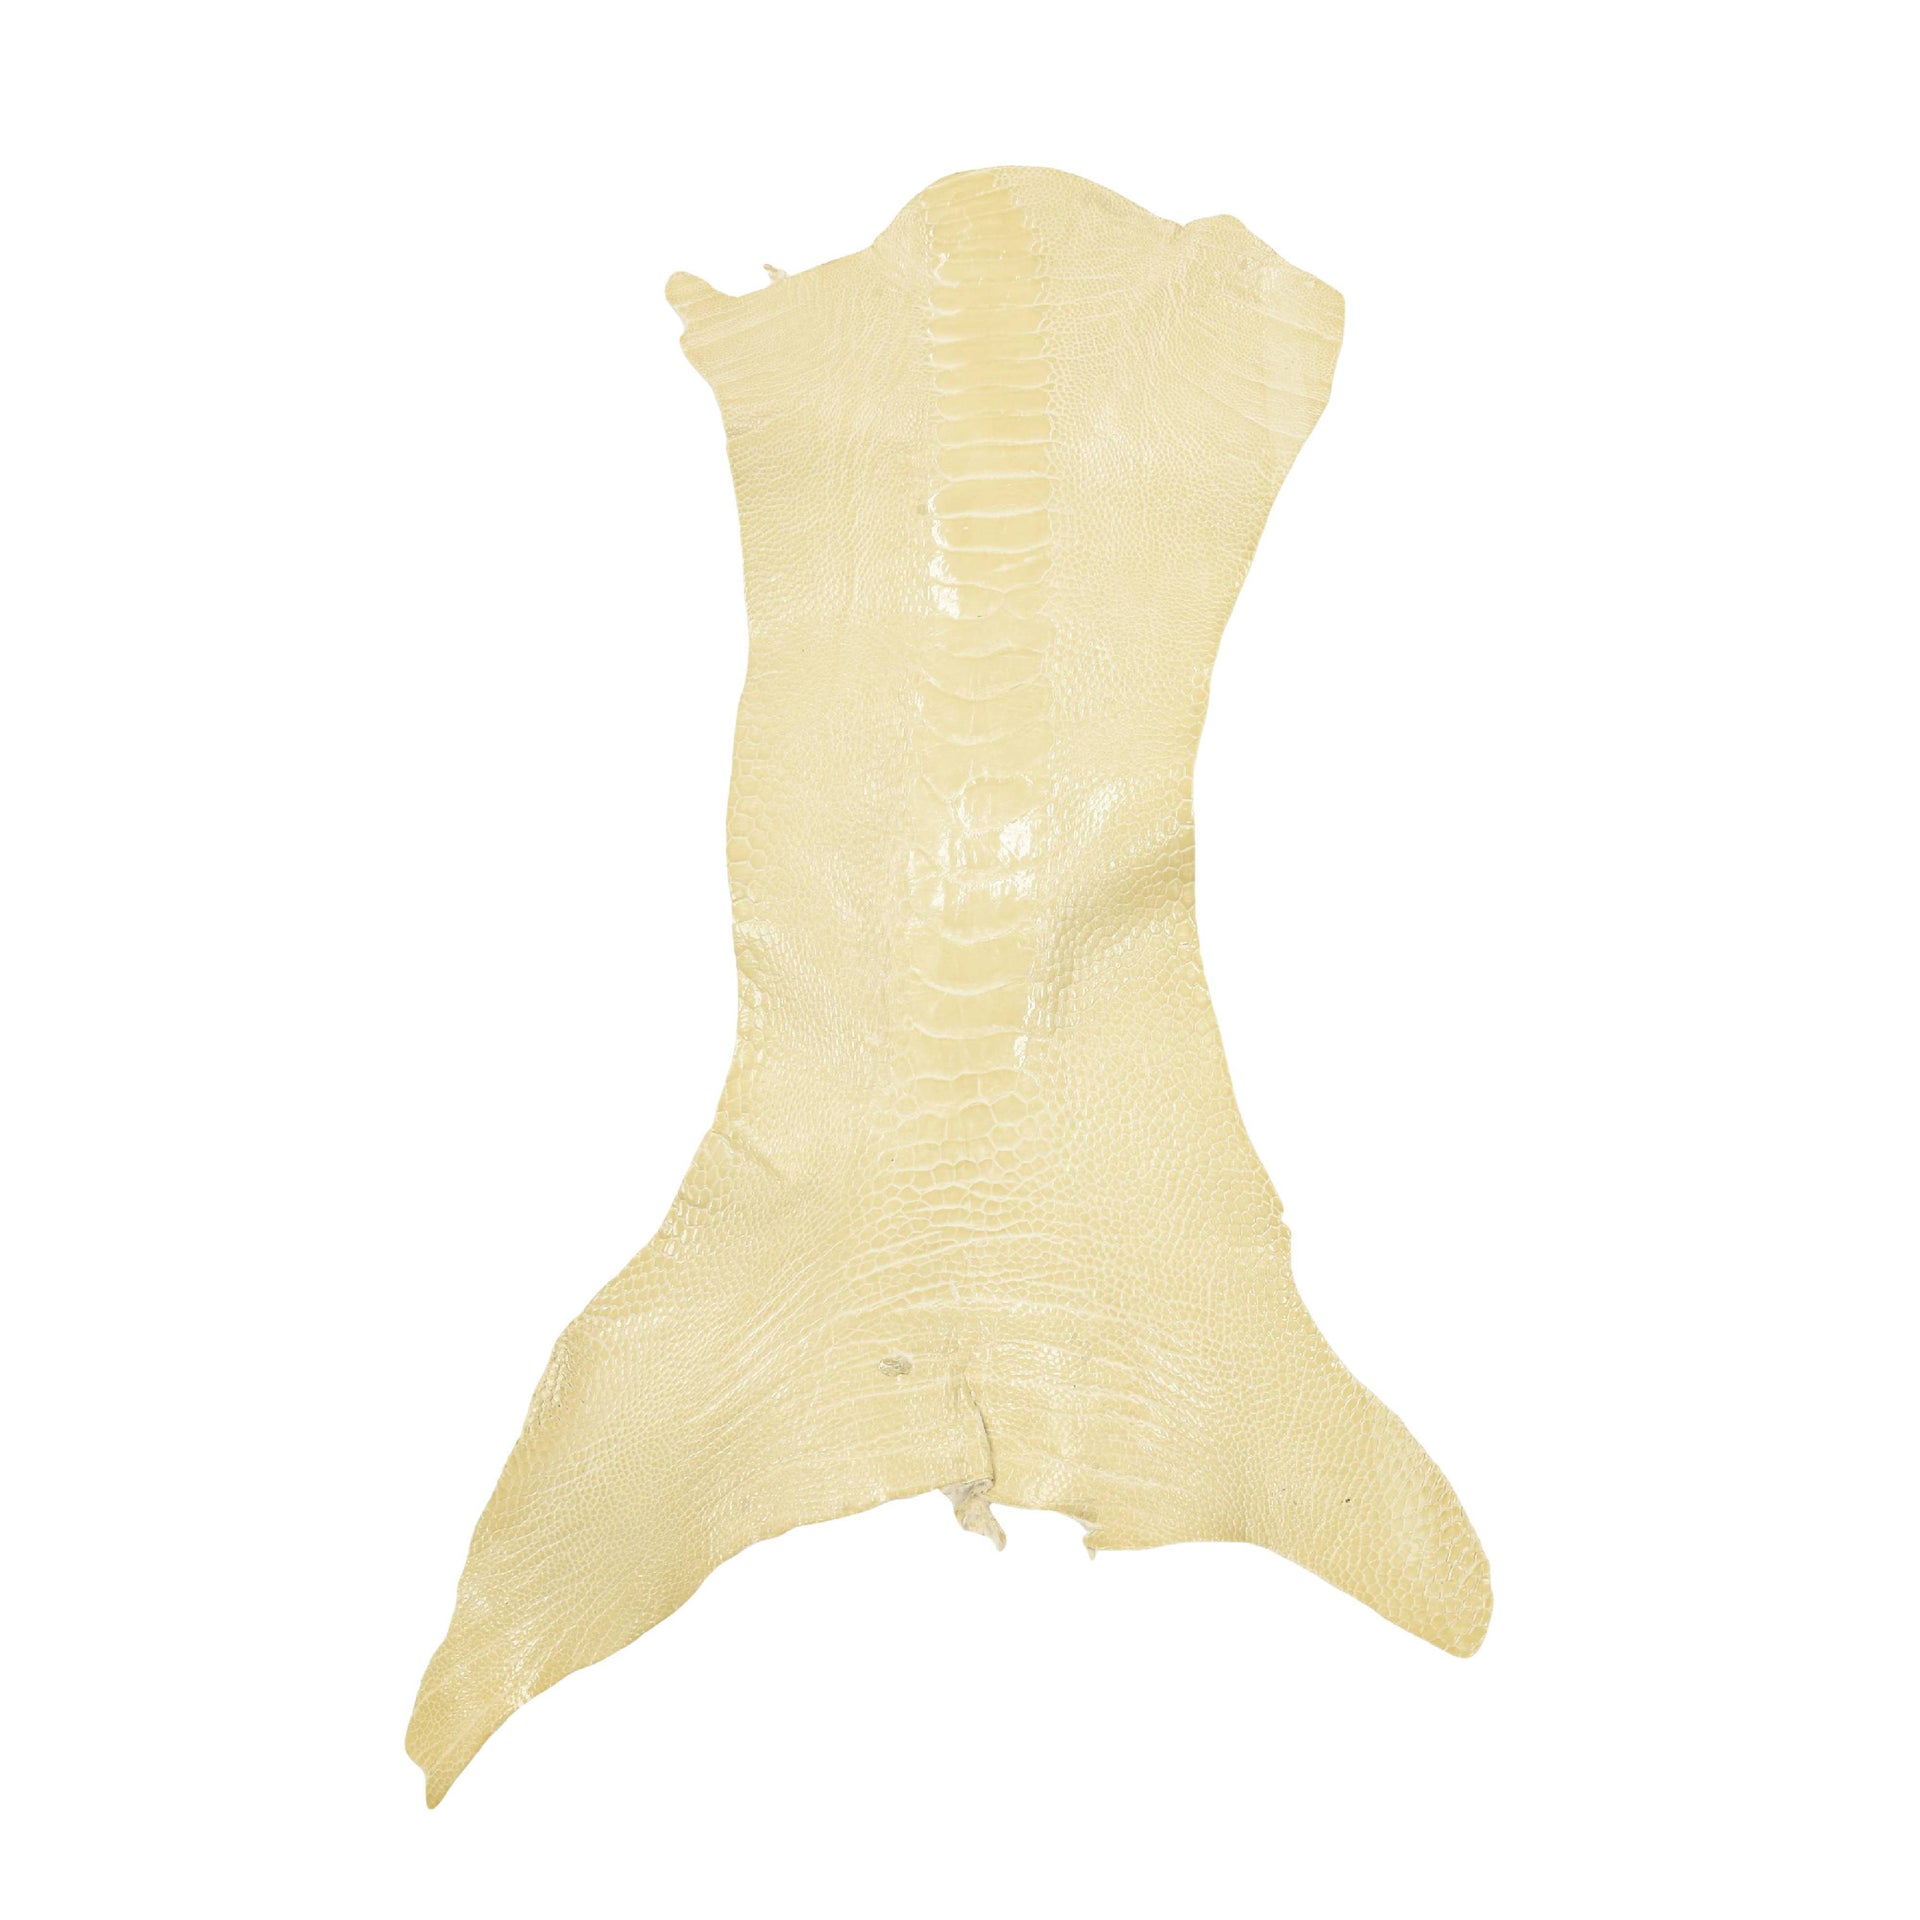 Ostrich Leg Skins, 12"-16", 2-3 oz, Glazed, Blanched Almond Cream | The Leather Guy